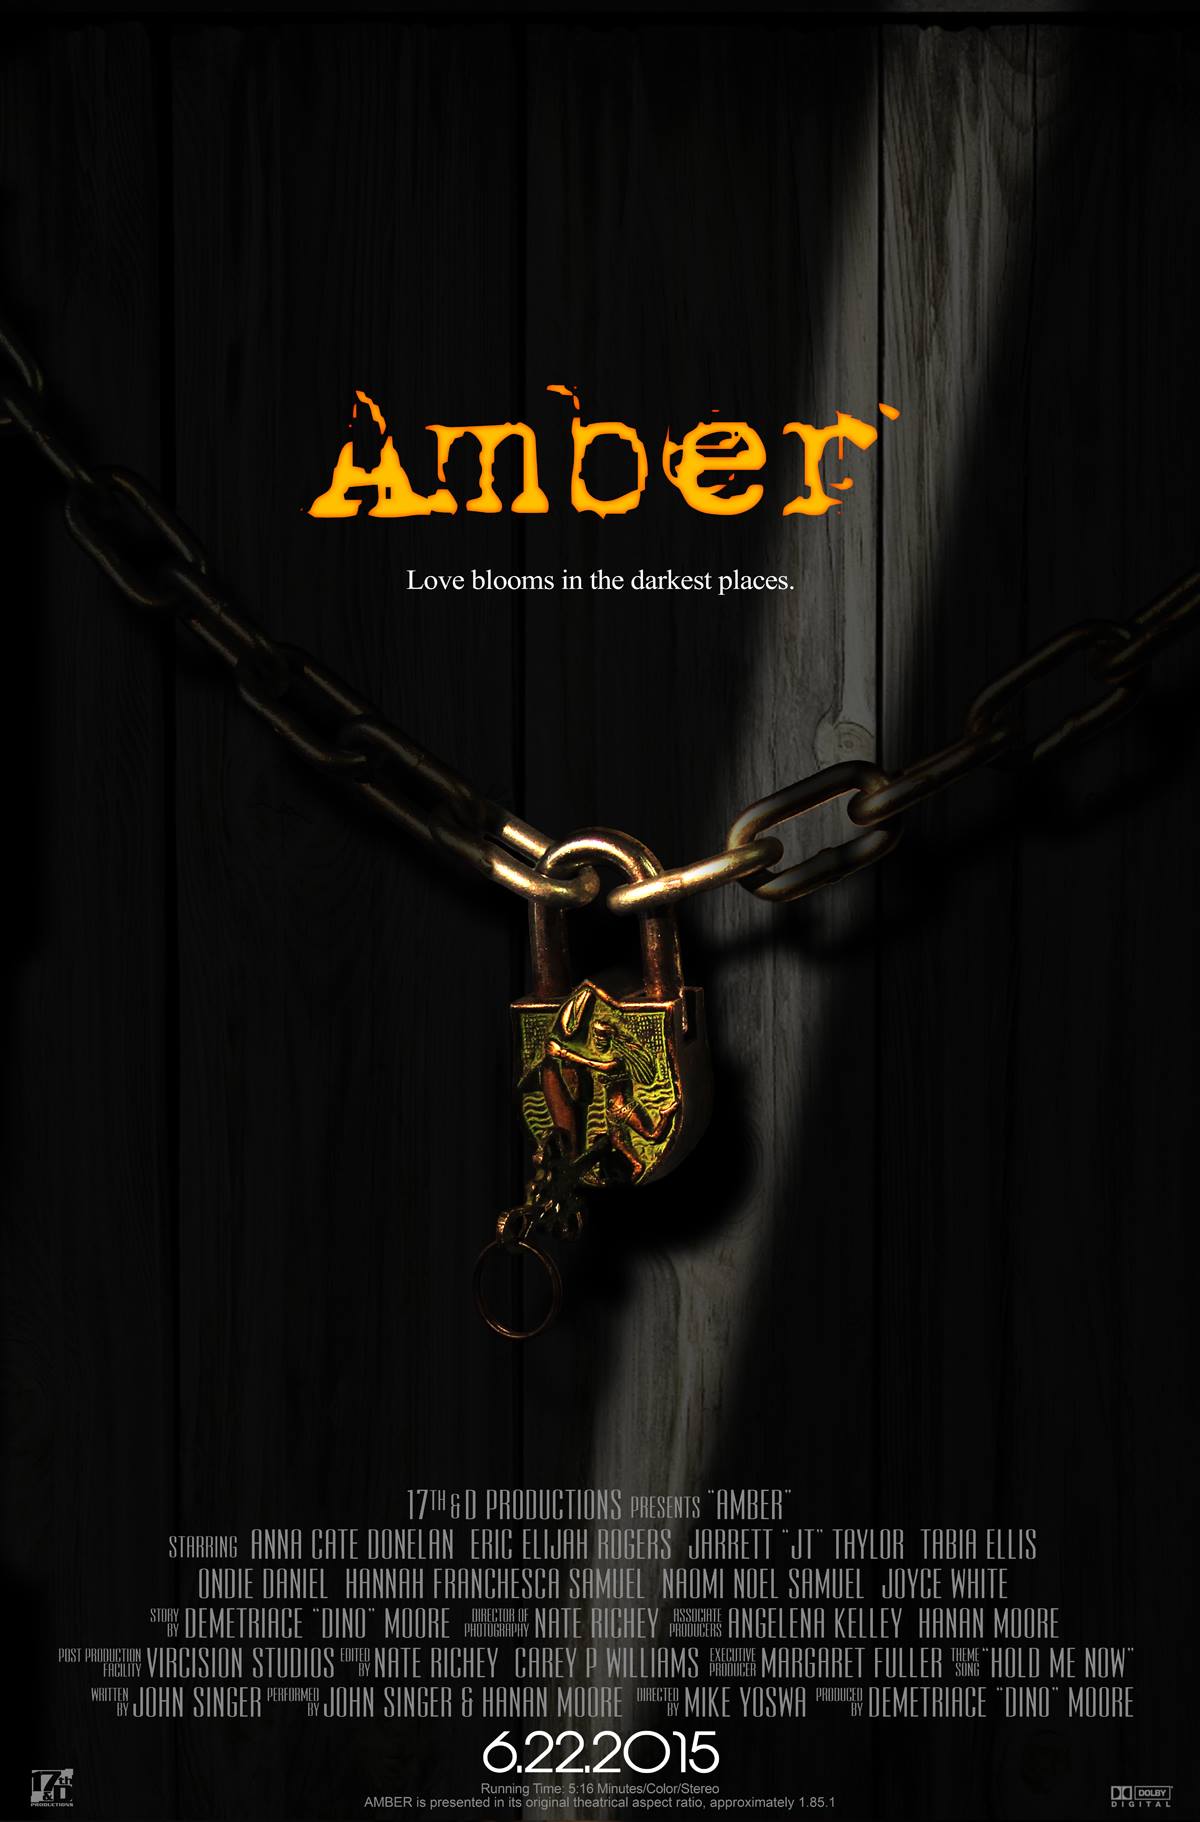 Film Poster AMBER soon to become a featured full length movie.